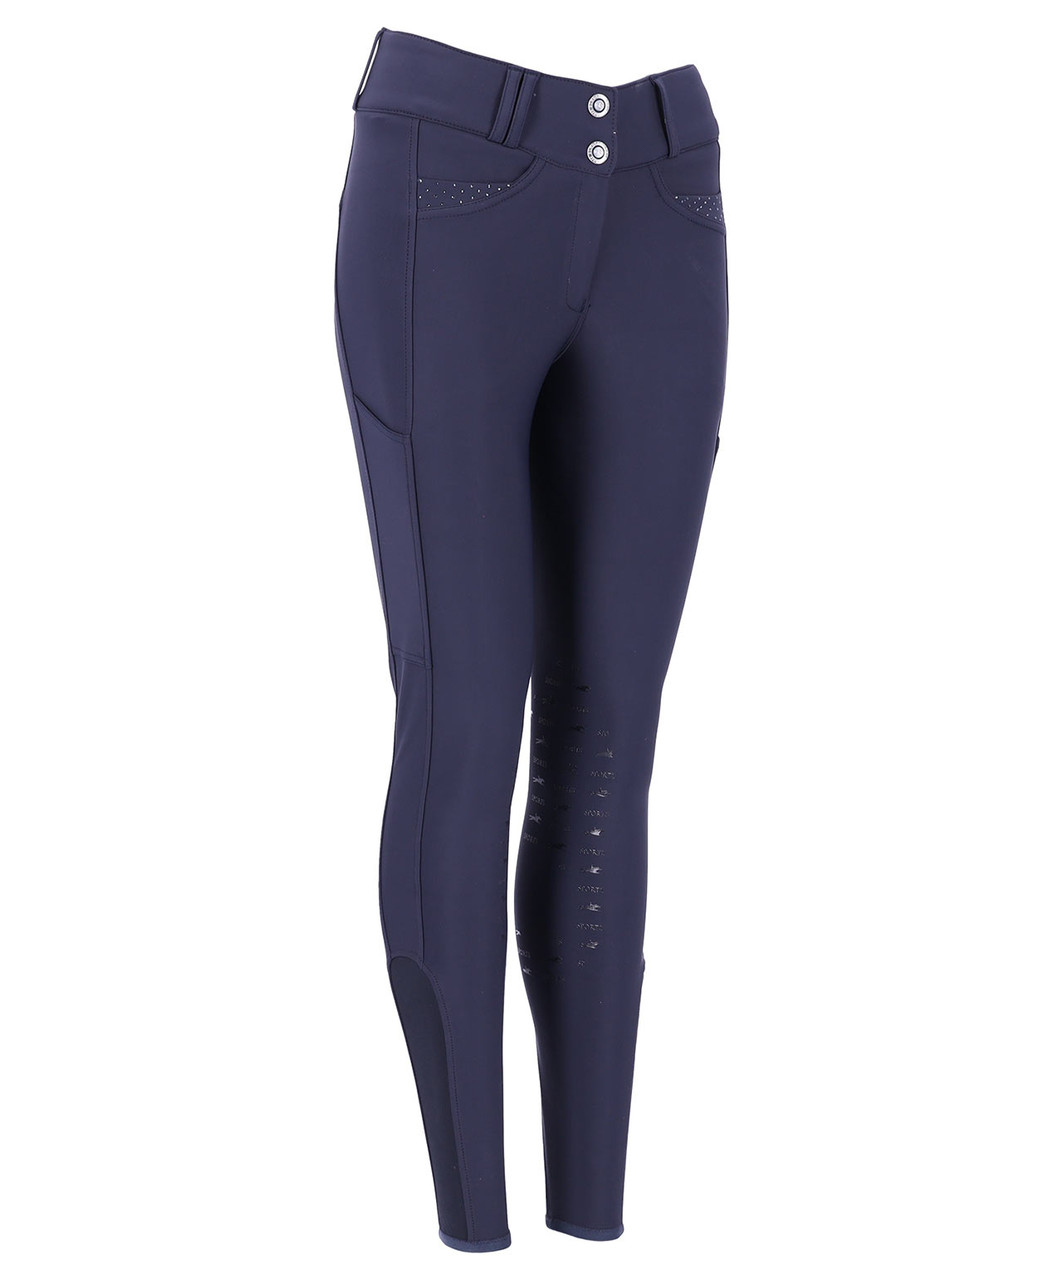 For The Rider - Women's Horse Riding Apparel - Women's Breeches - Women's  Winter Breeches - Sprucewood Tack